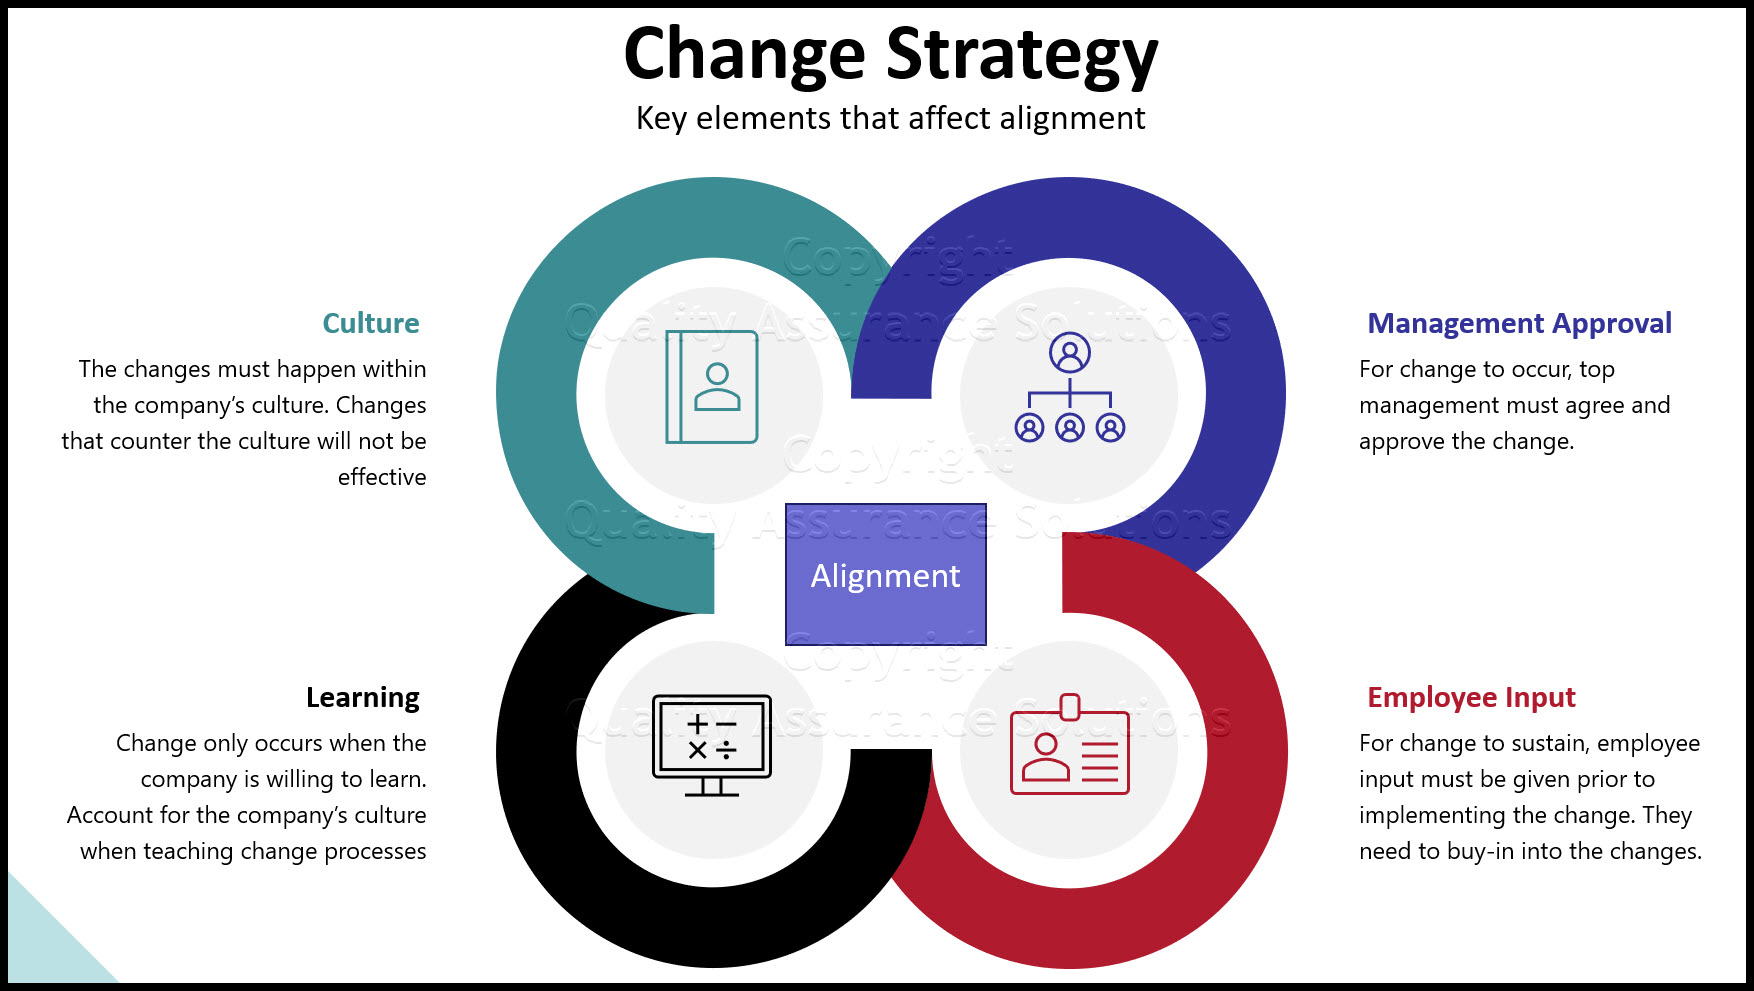 Understand these key elements of change strategy to create company alignment and assure effective change.